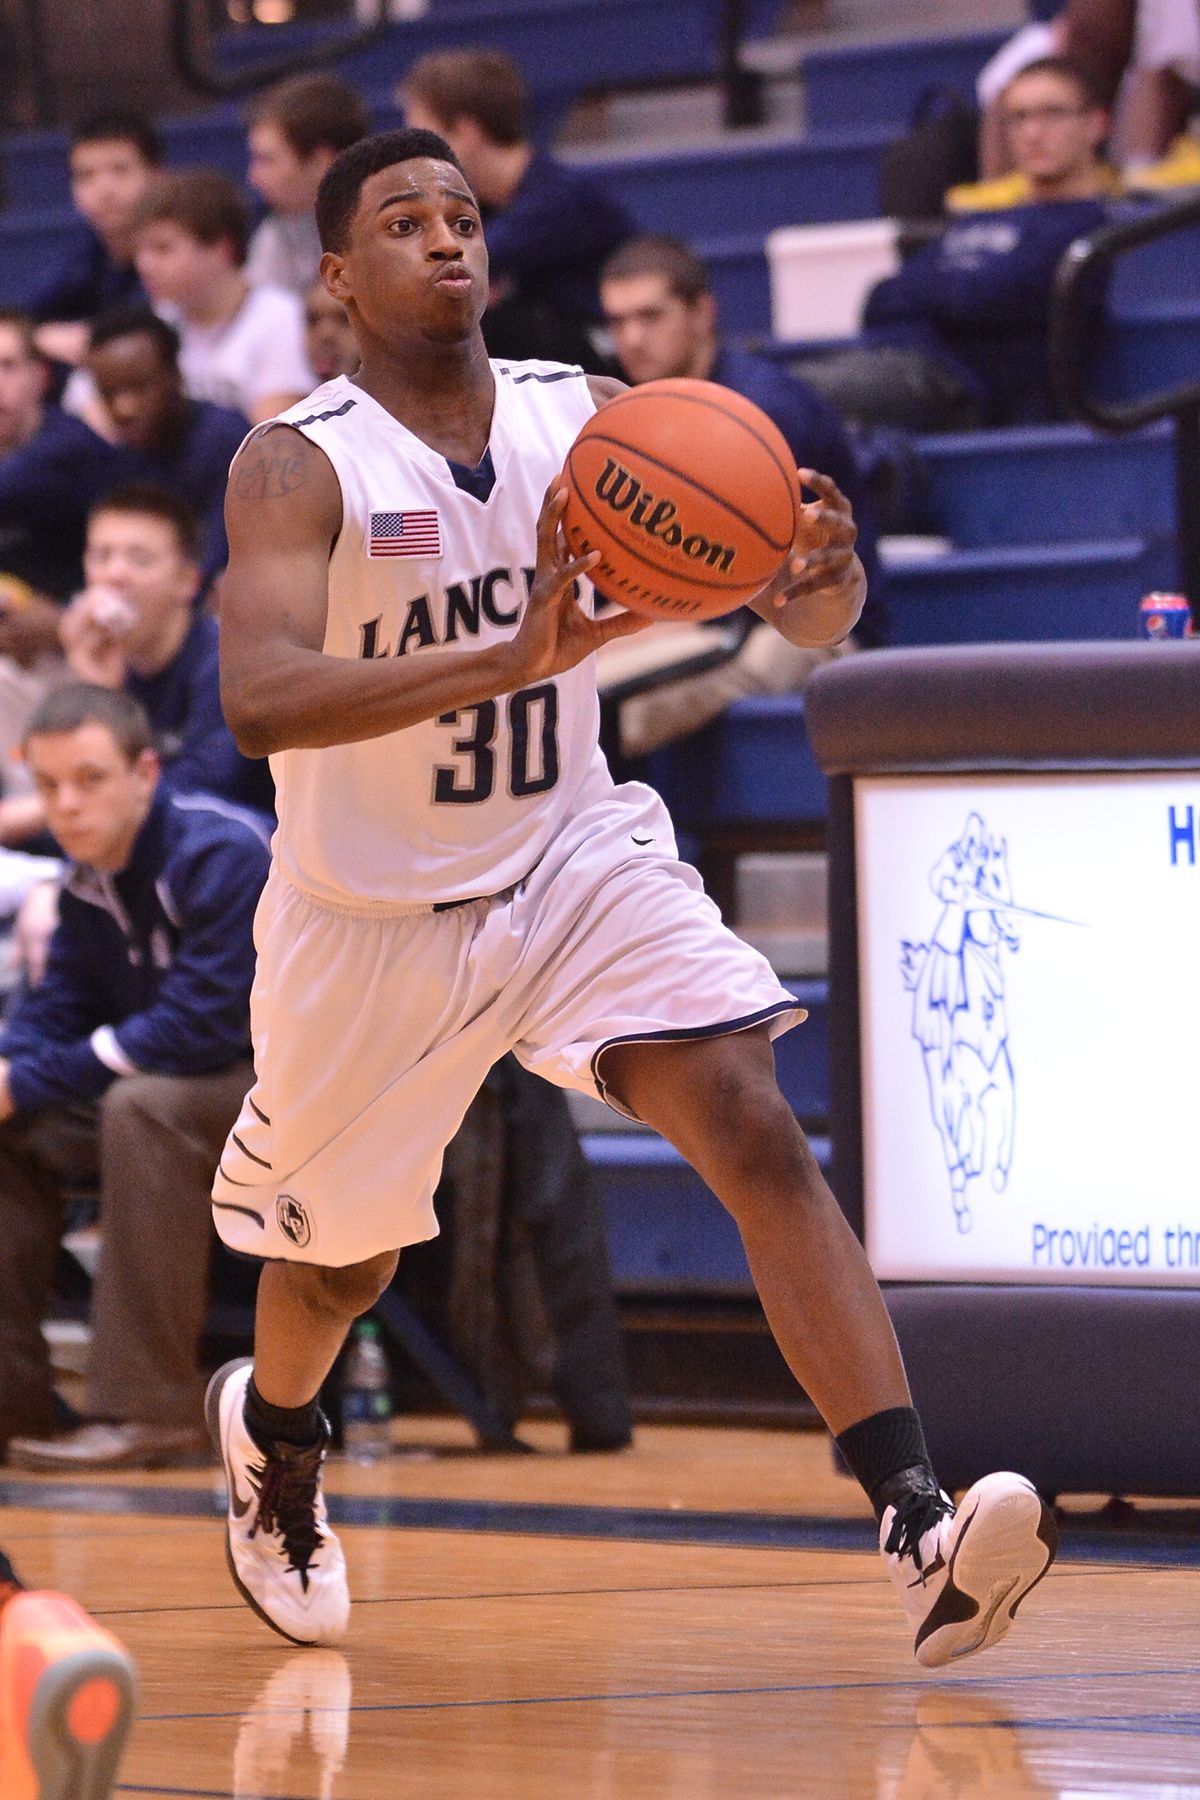 Lake Park's Marcus McDaniel (30) passes the ball up court against Wheaton-Warrenville South.